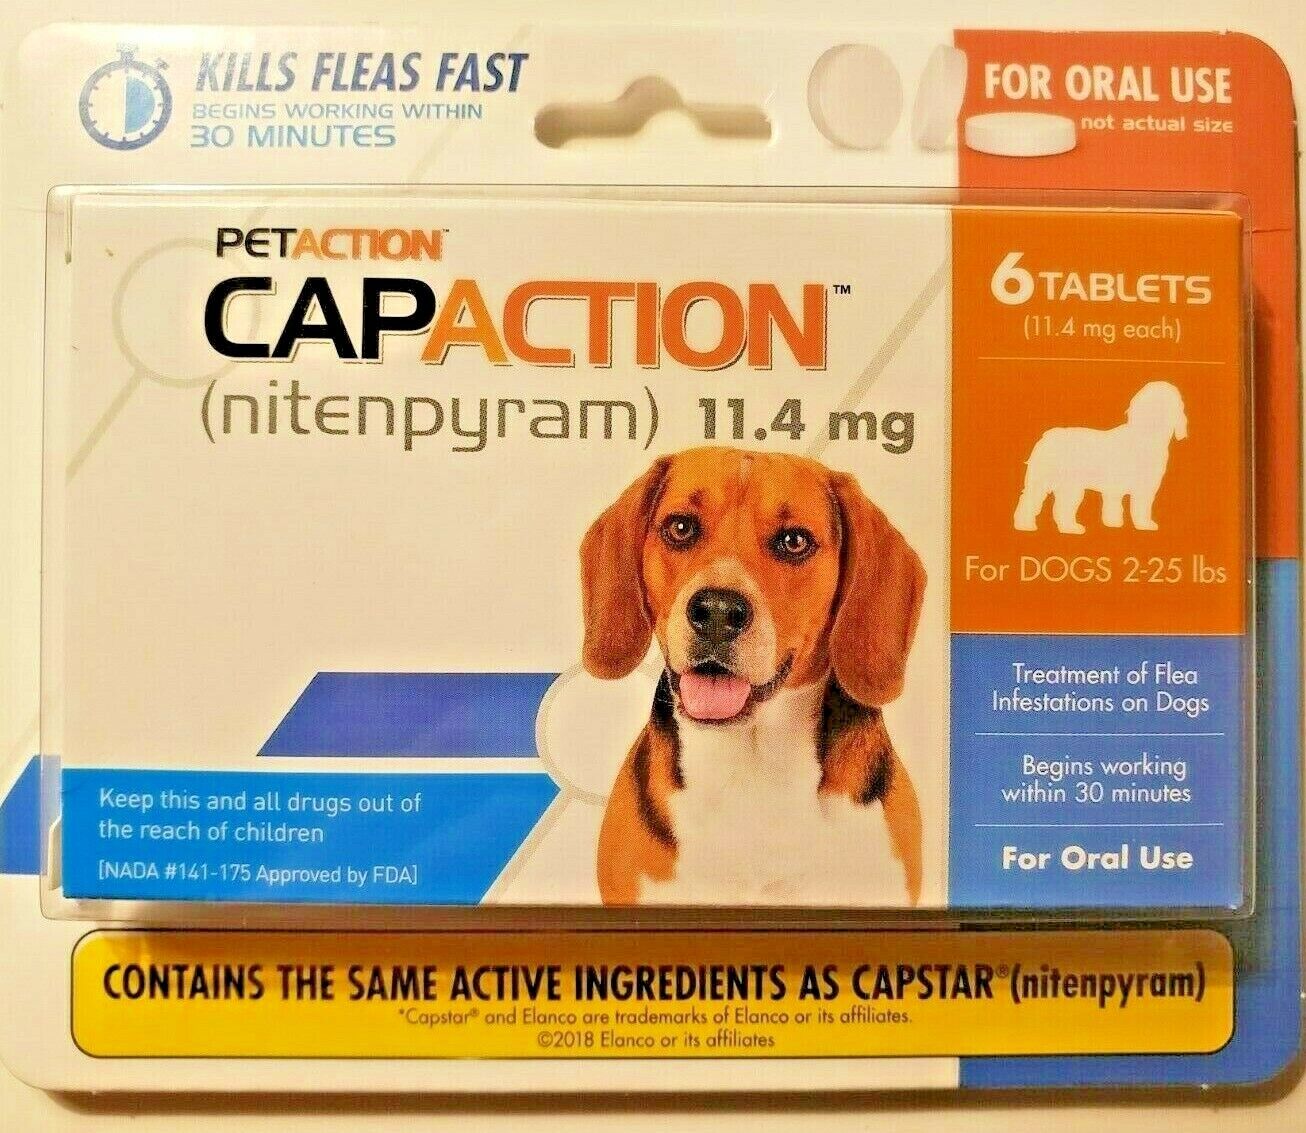 Petaction Capaction 6 tablets Kills Fleas Dogs 4-25 lbs lbs New Sealed 